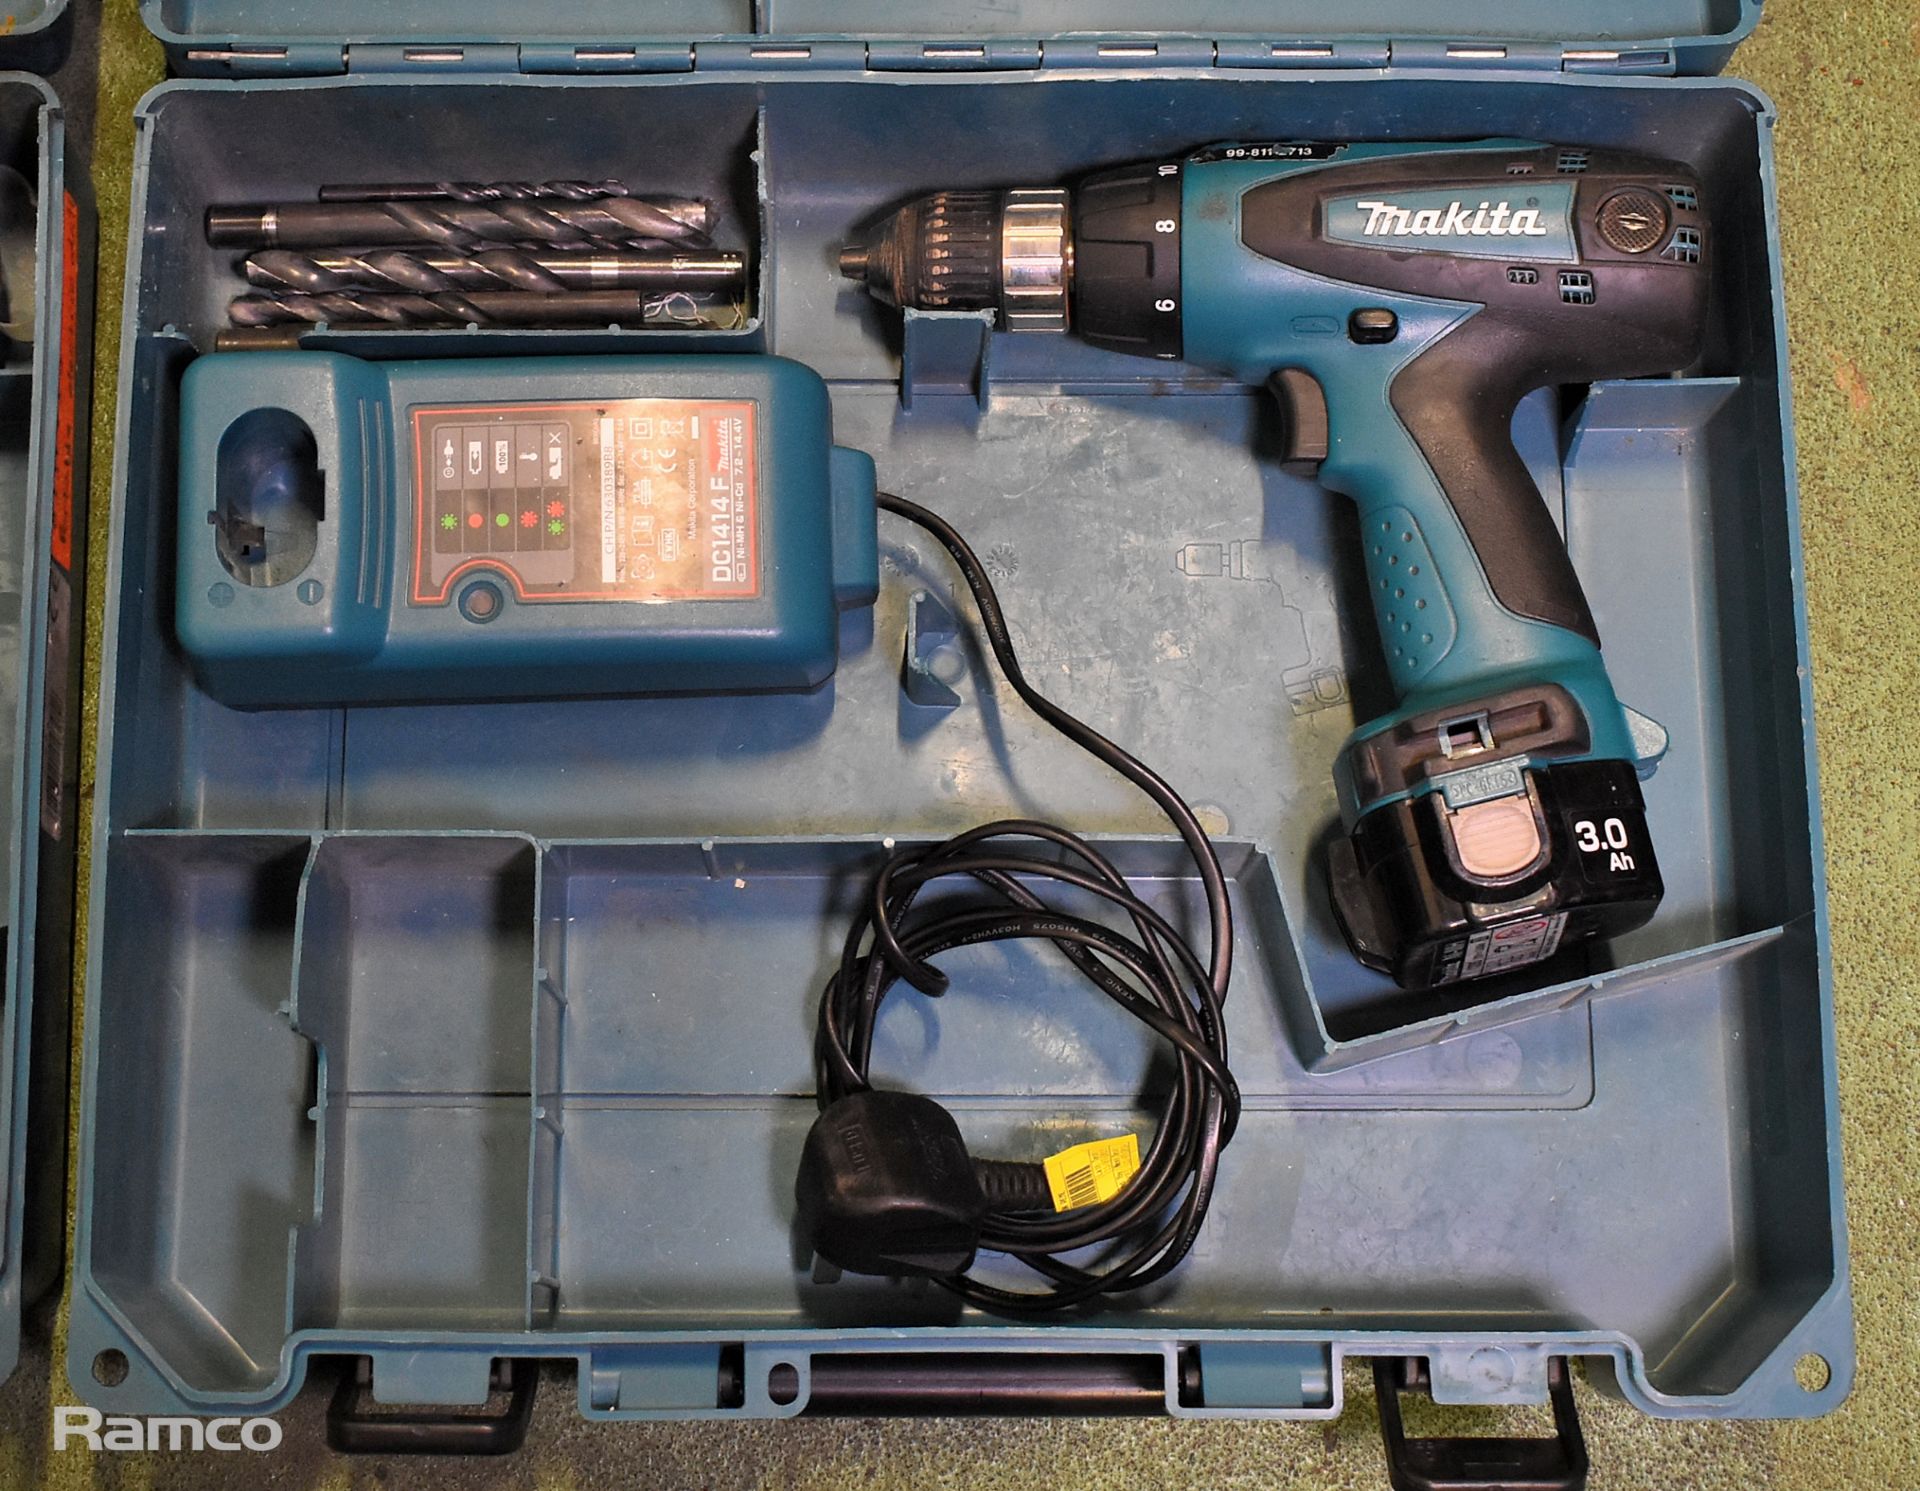 2x Makita 6317D cordless drills - DC1414F charger - 1x 12V battery - case - Image 5 of 8